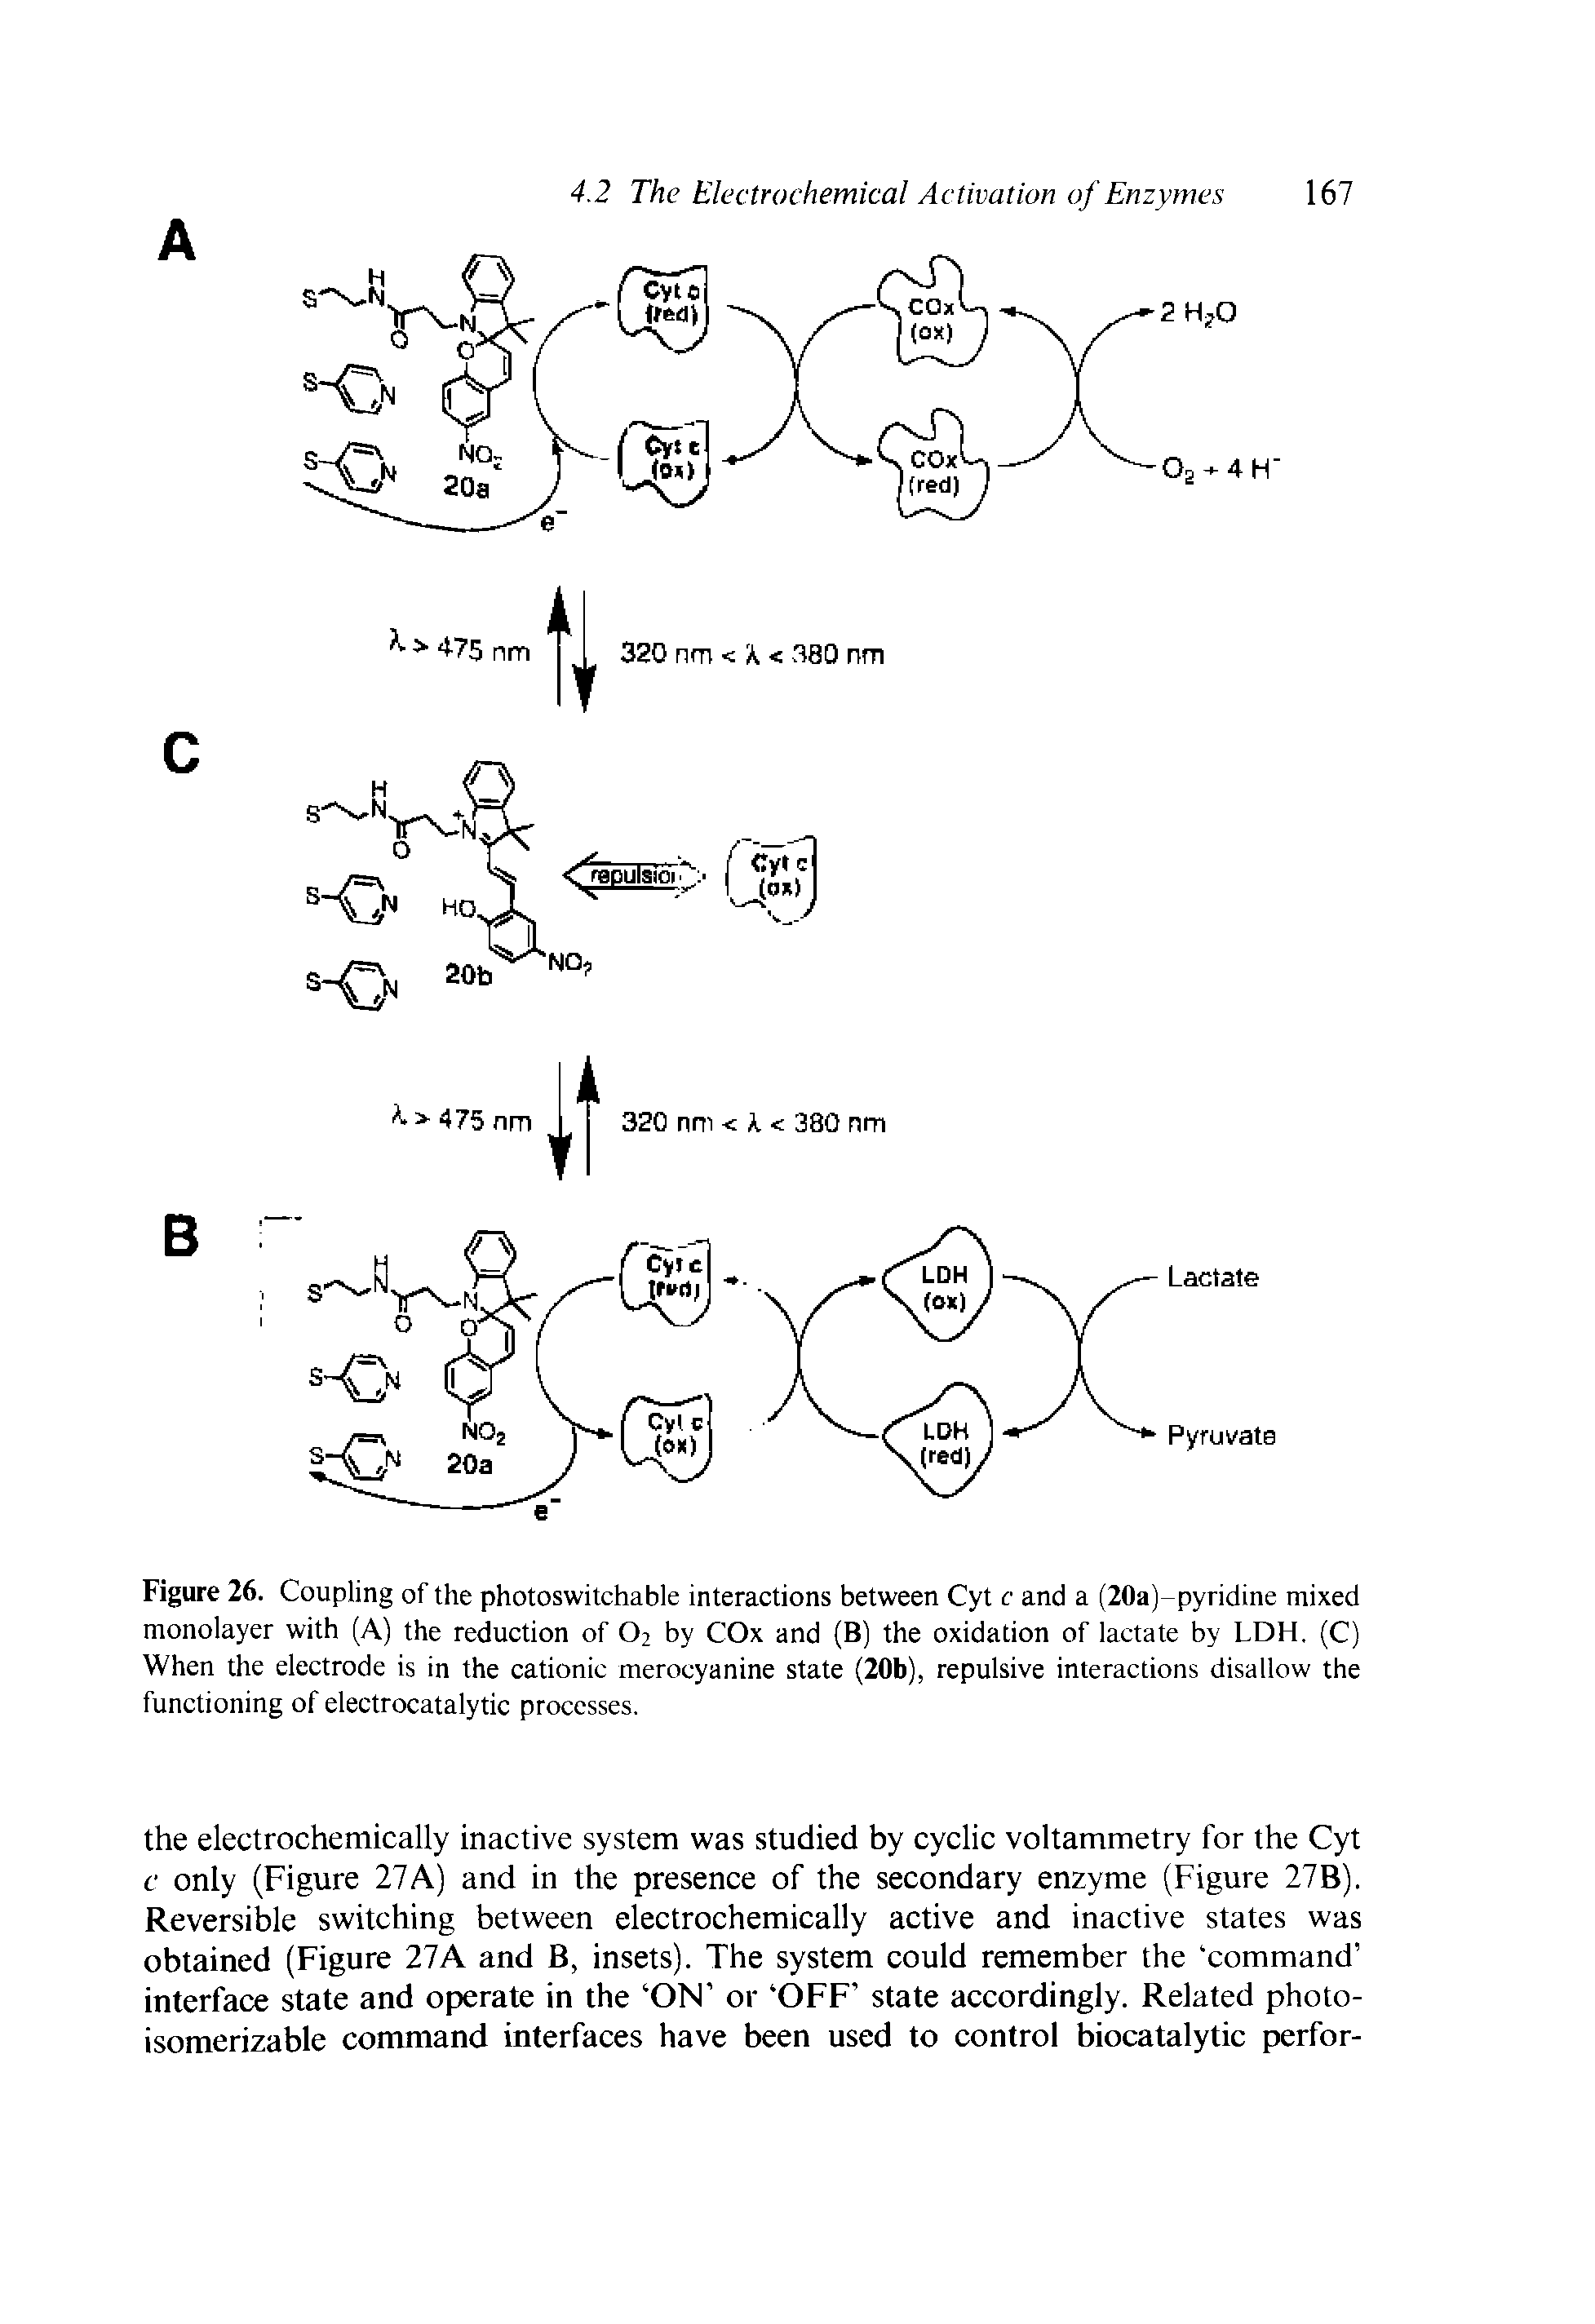 Figure 26. Coupling of the photoswitchable interactions between Cyt c and a (20a)-pyridine mixed monolayer with (A) the reduction of O2 by COx and (B) the oxidation of lactate by LDH. (C) When the electrode is in the cationic merocyanine state (20b), repulsive interactions disallow the functioning of electrocatalytic processes.